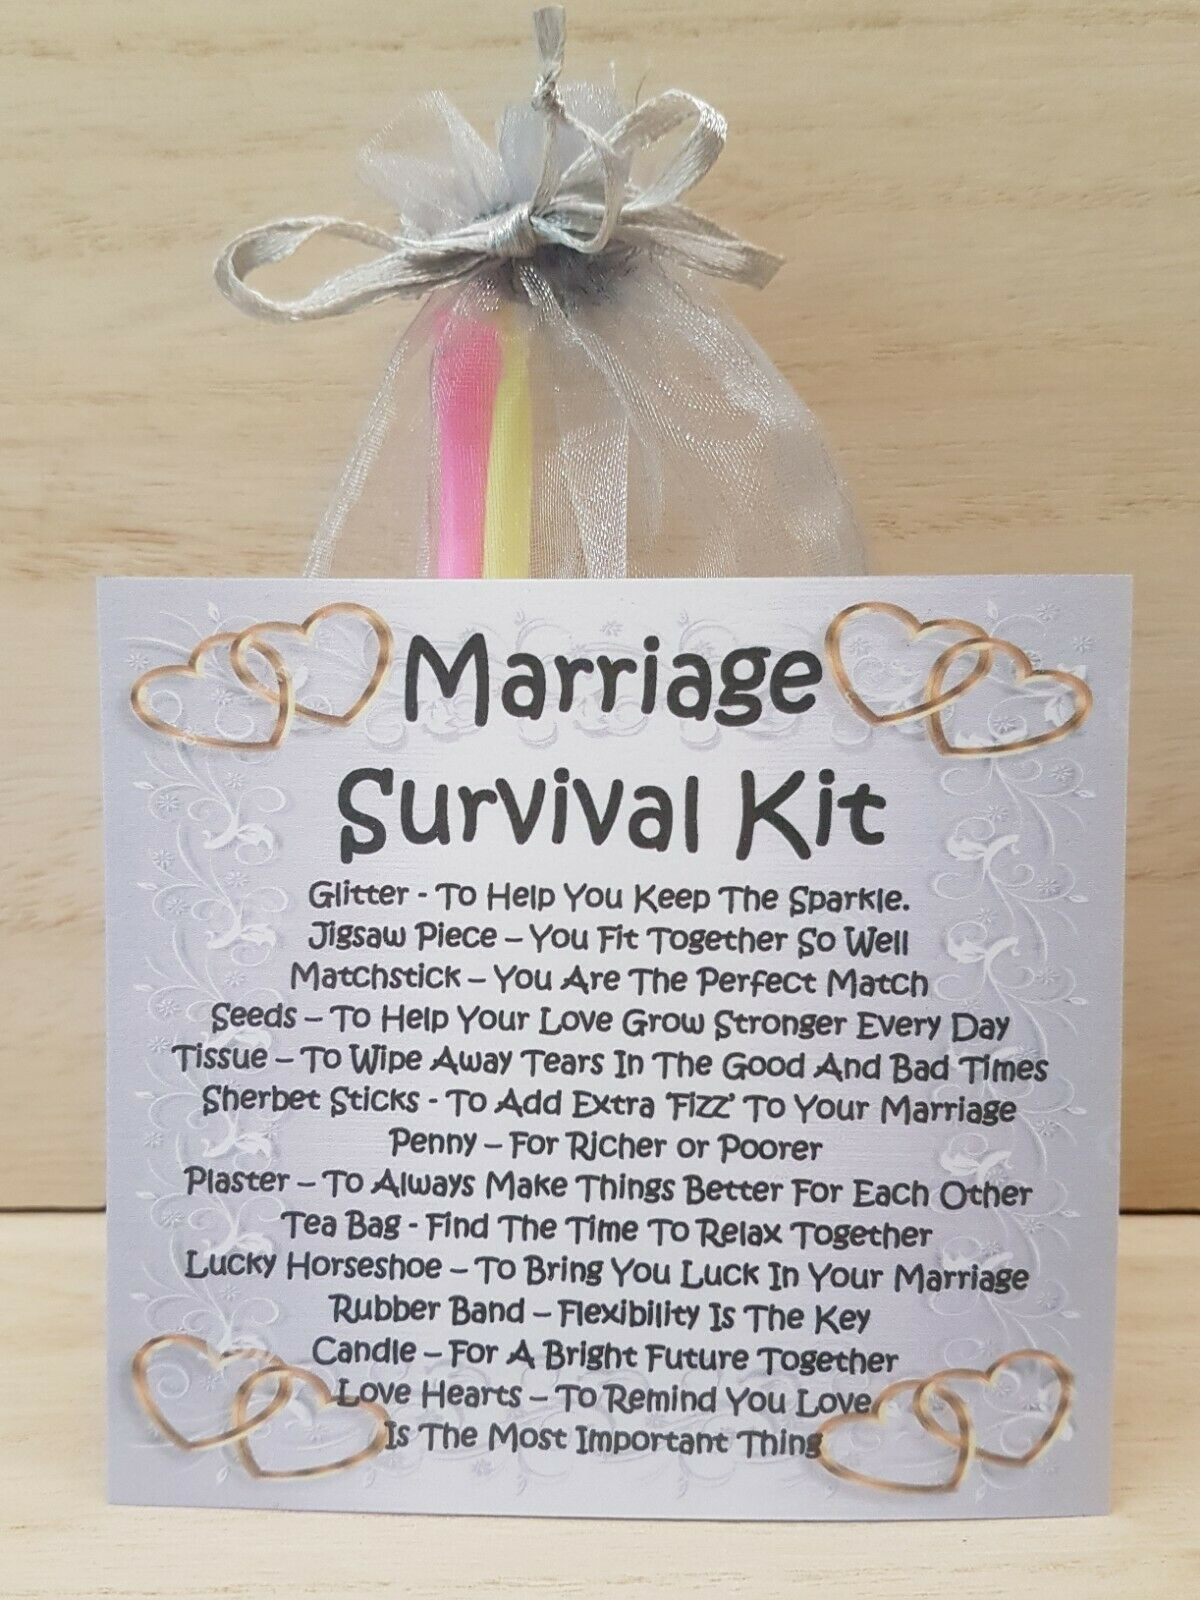 Wedding Gift Ideas For Wealthy Couple
 Marriage Survival Kit A Unique Fun Novelty Gift